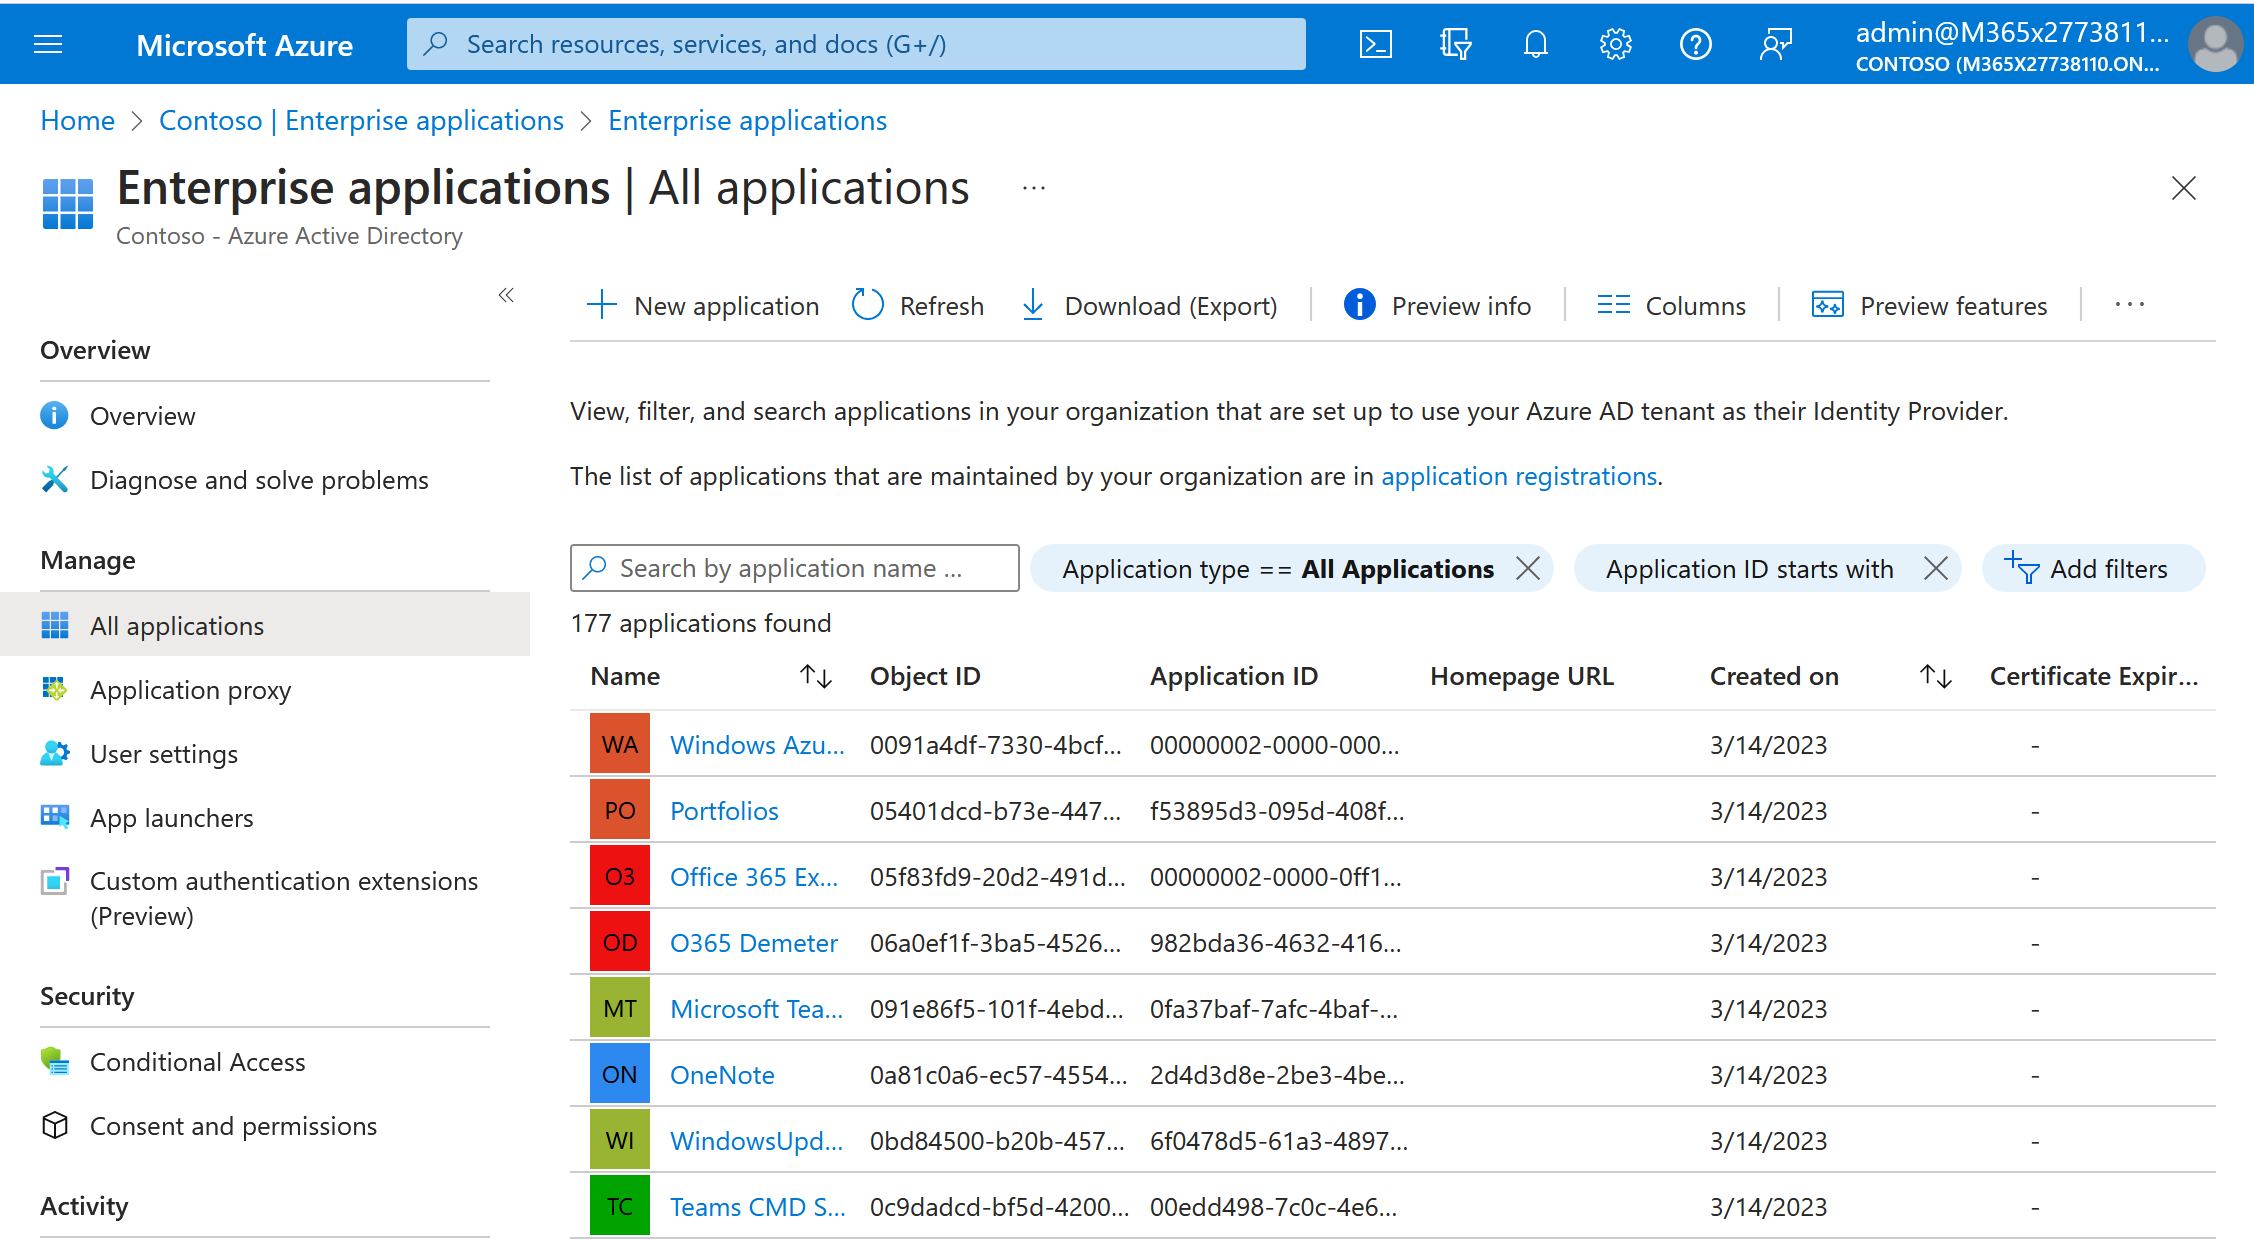 View the registered applications in your Azure AD tenant.